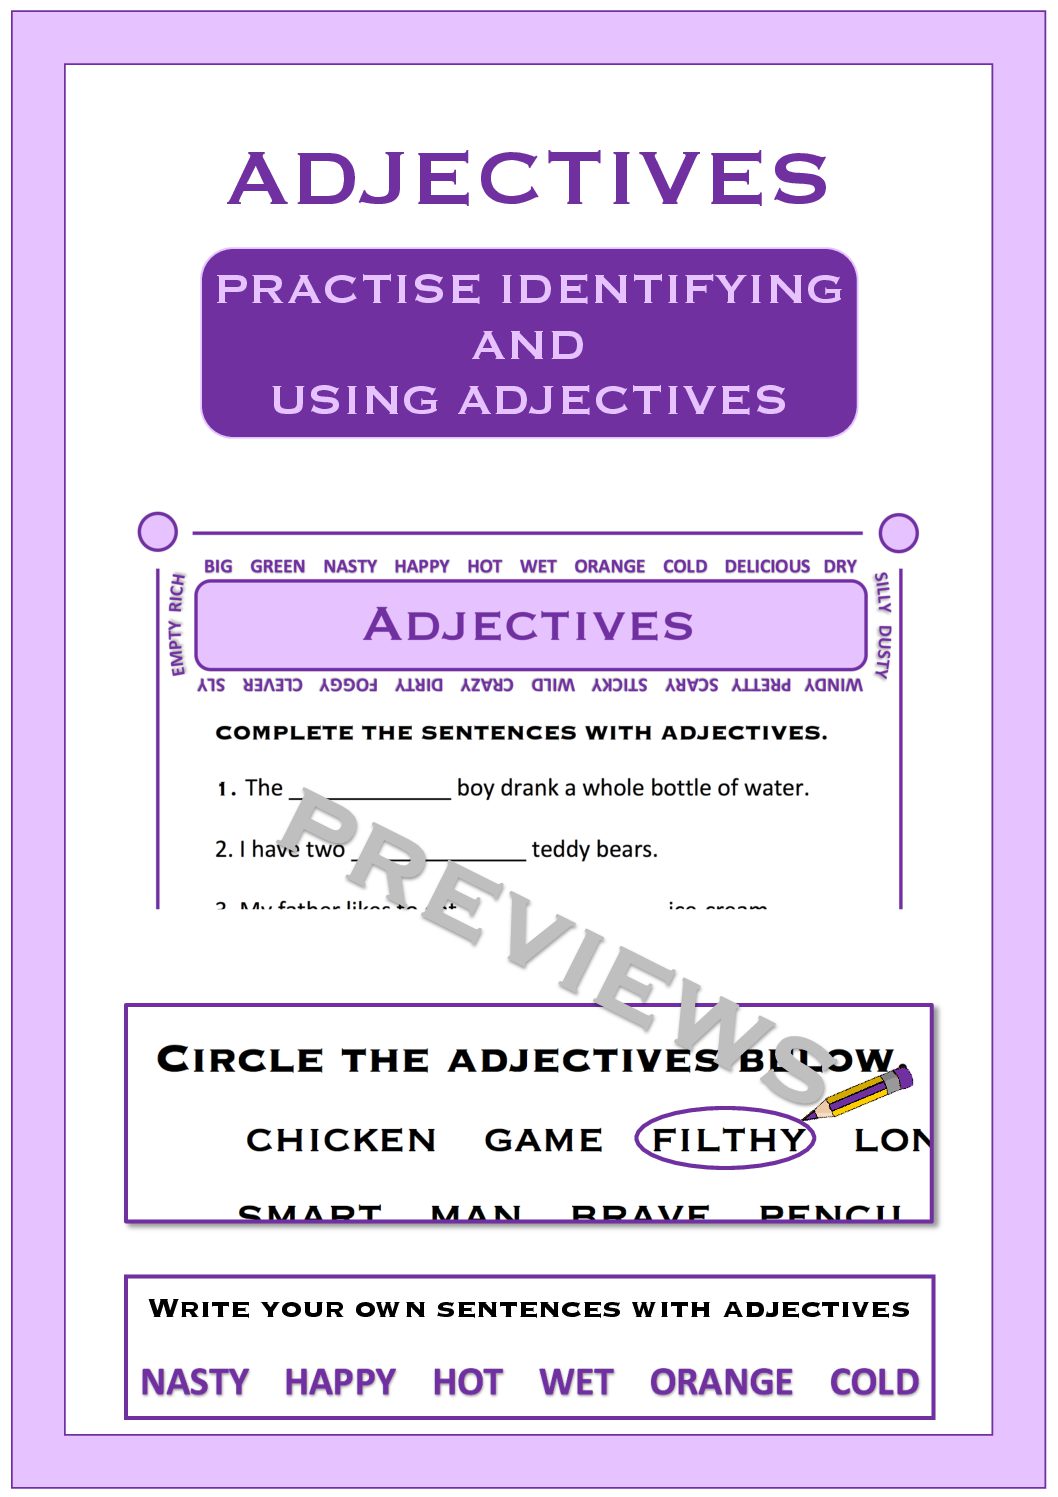 free-using-adjectives-and-adverbs-worksheets